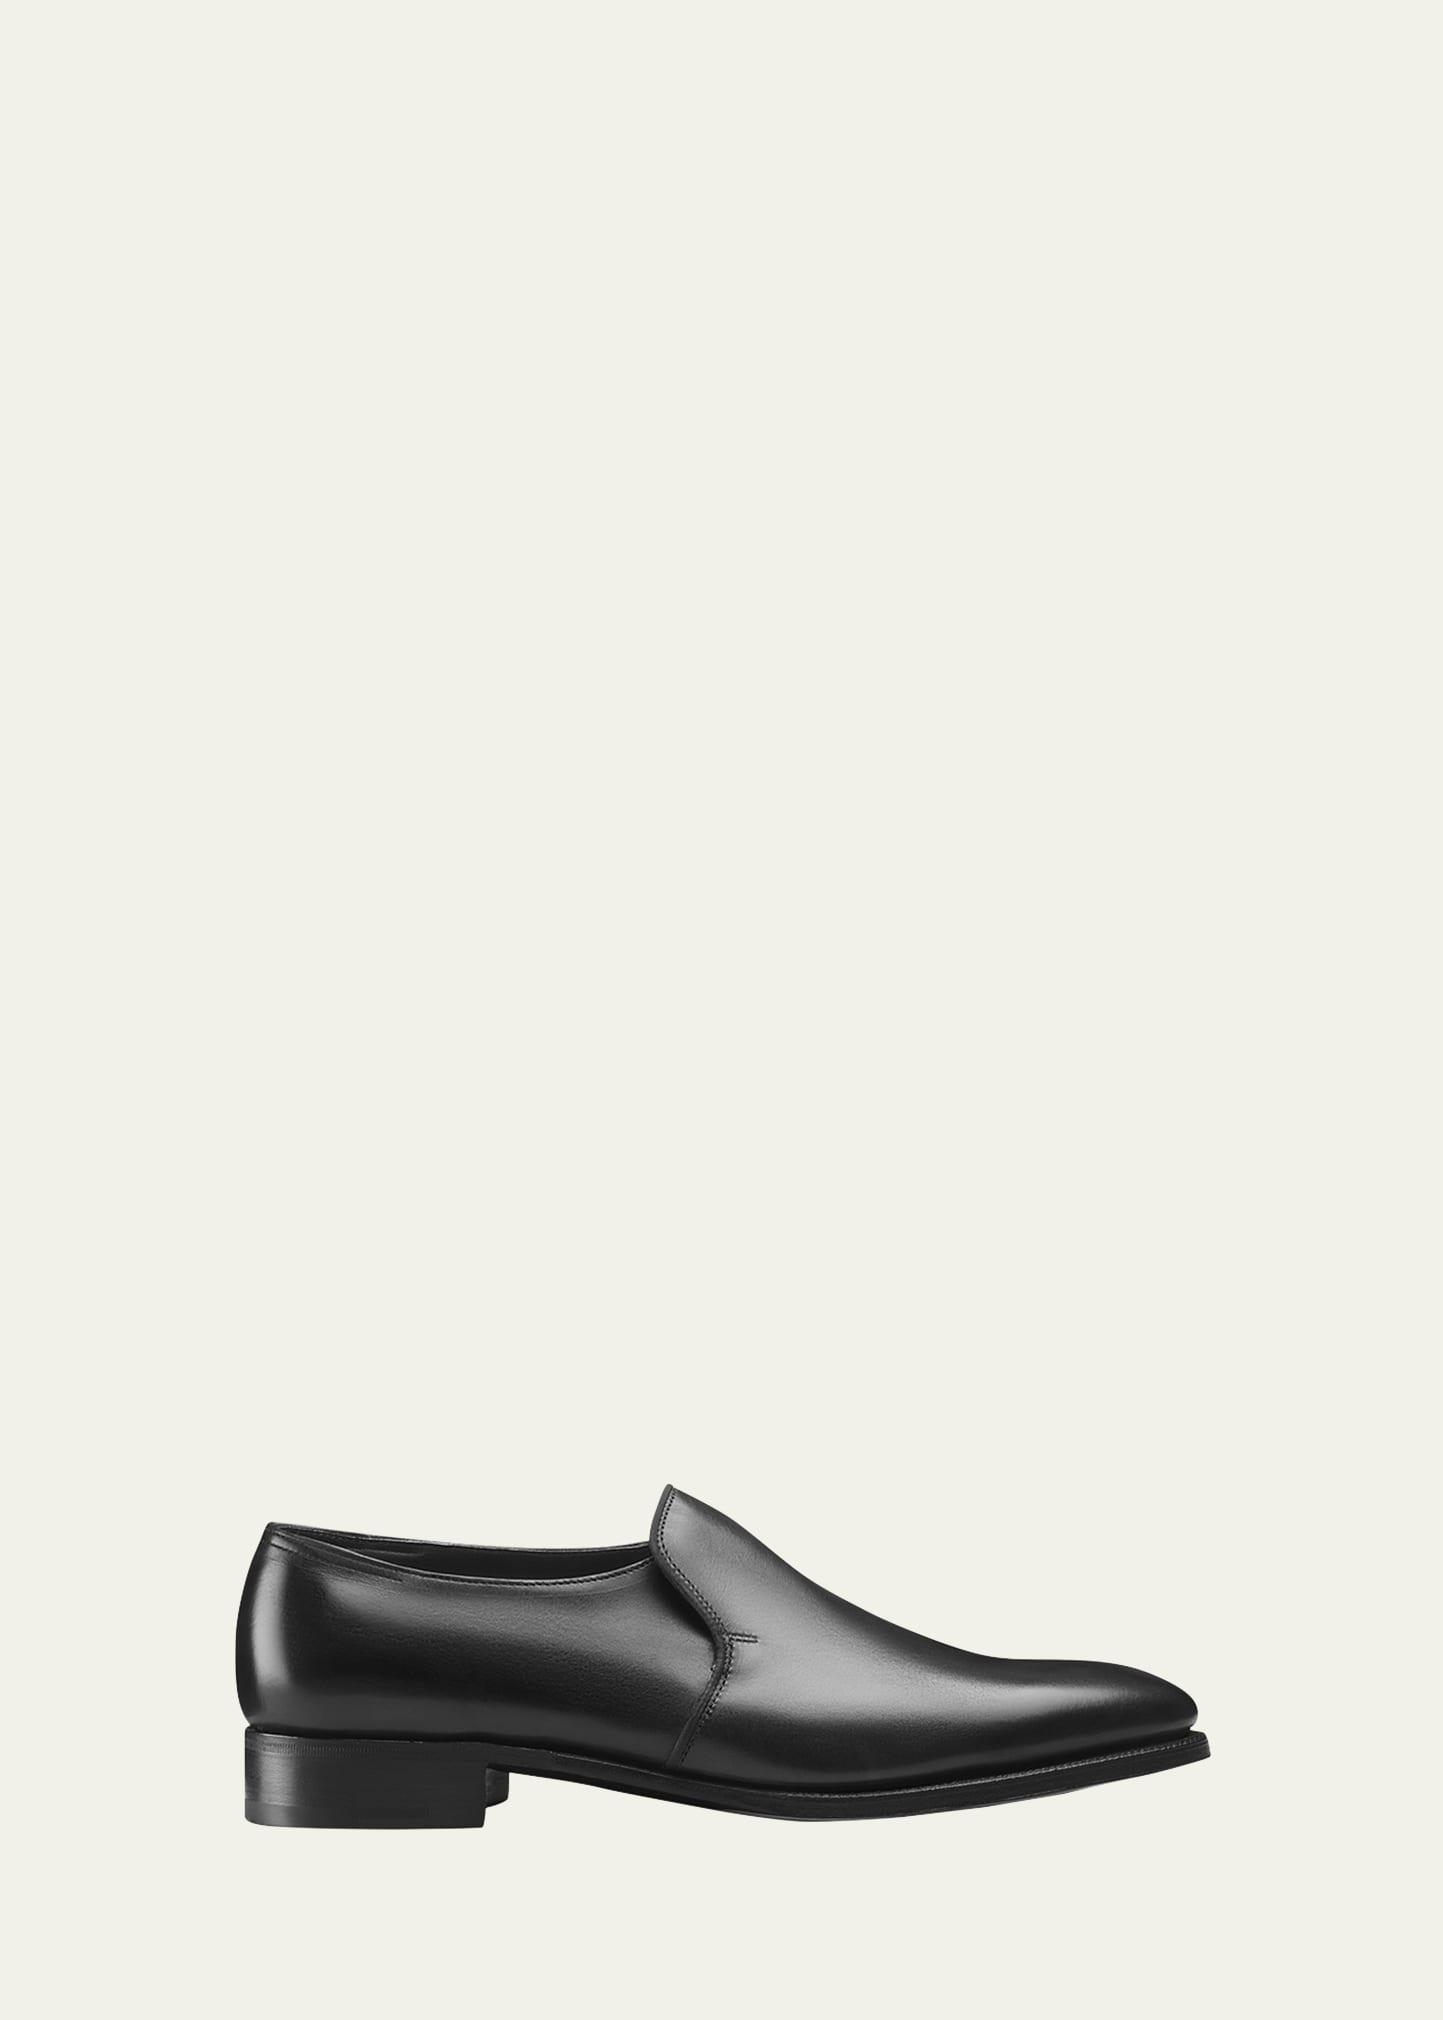 Mens Edward Leather Loafers Product Image